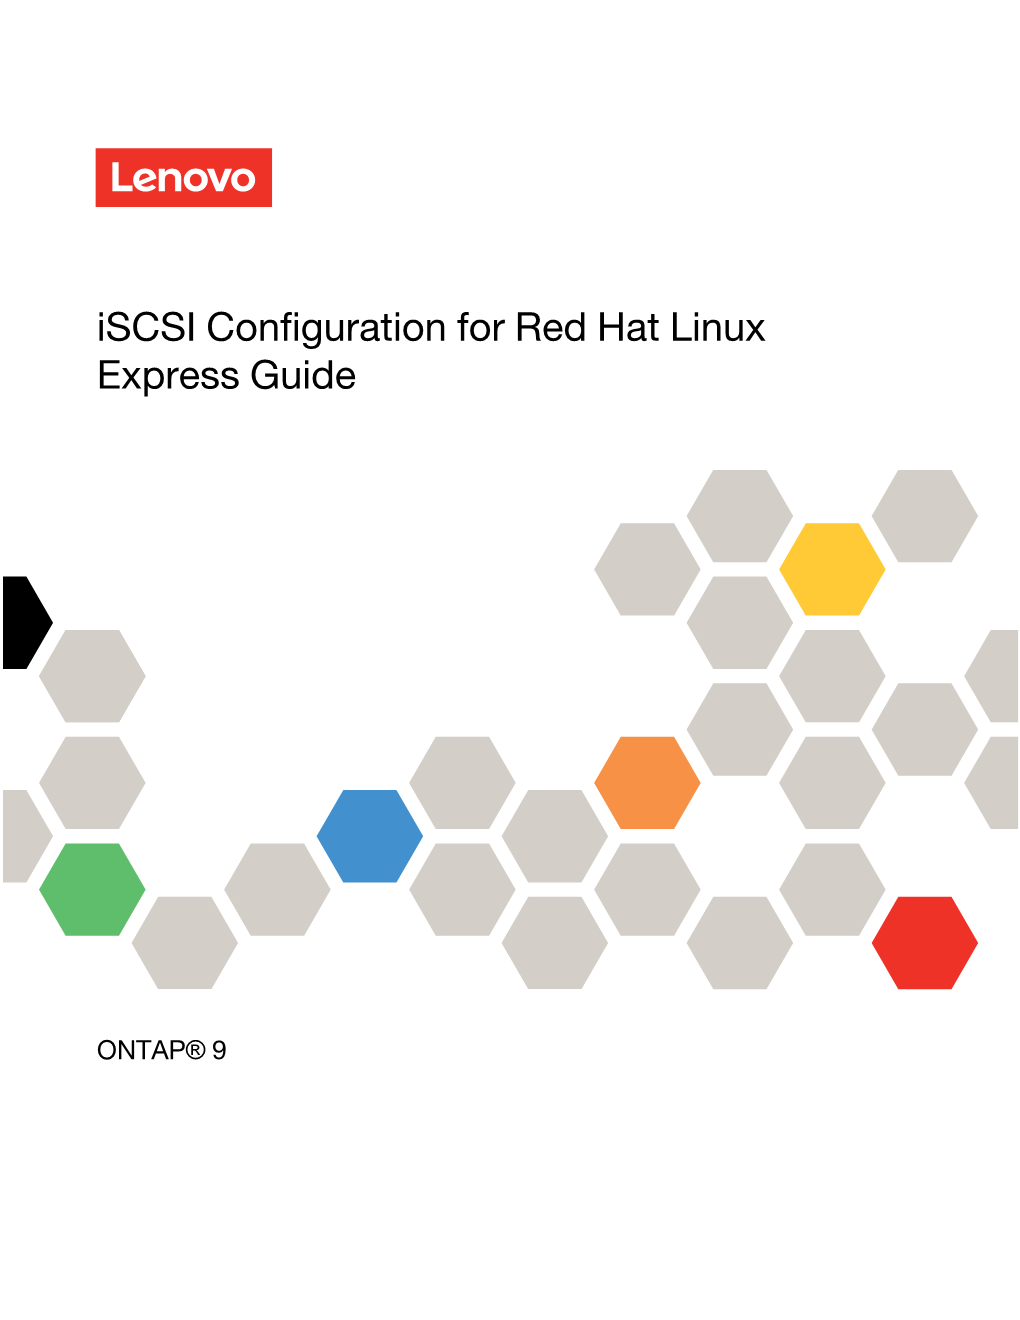 Iscsi Configuration for Red Hat Linux Express Guide